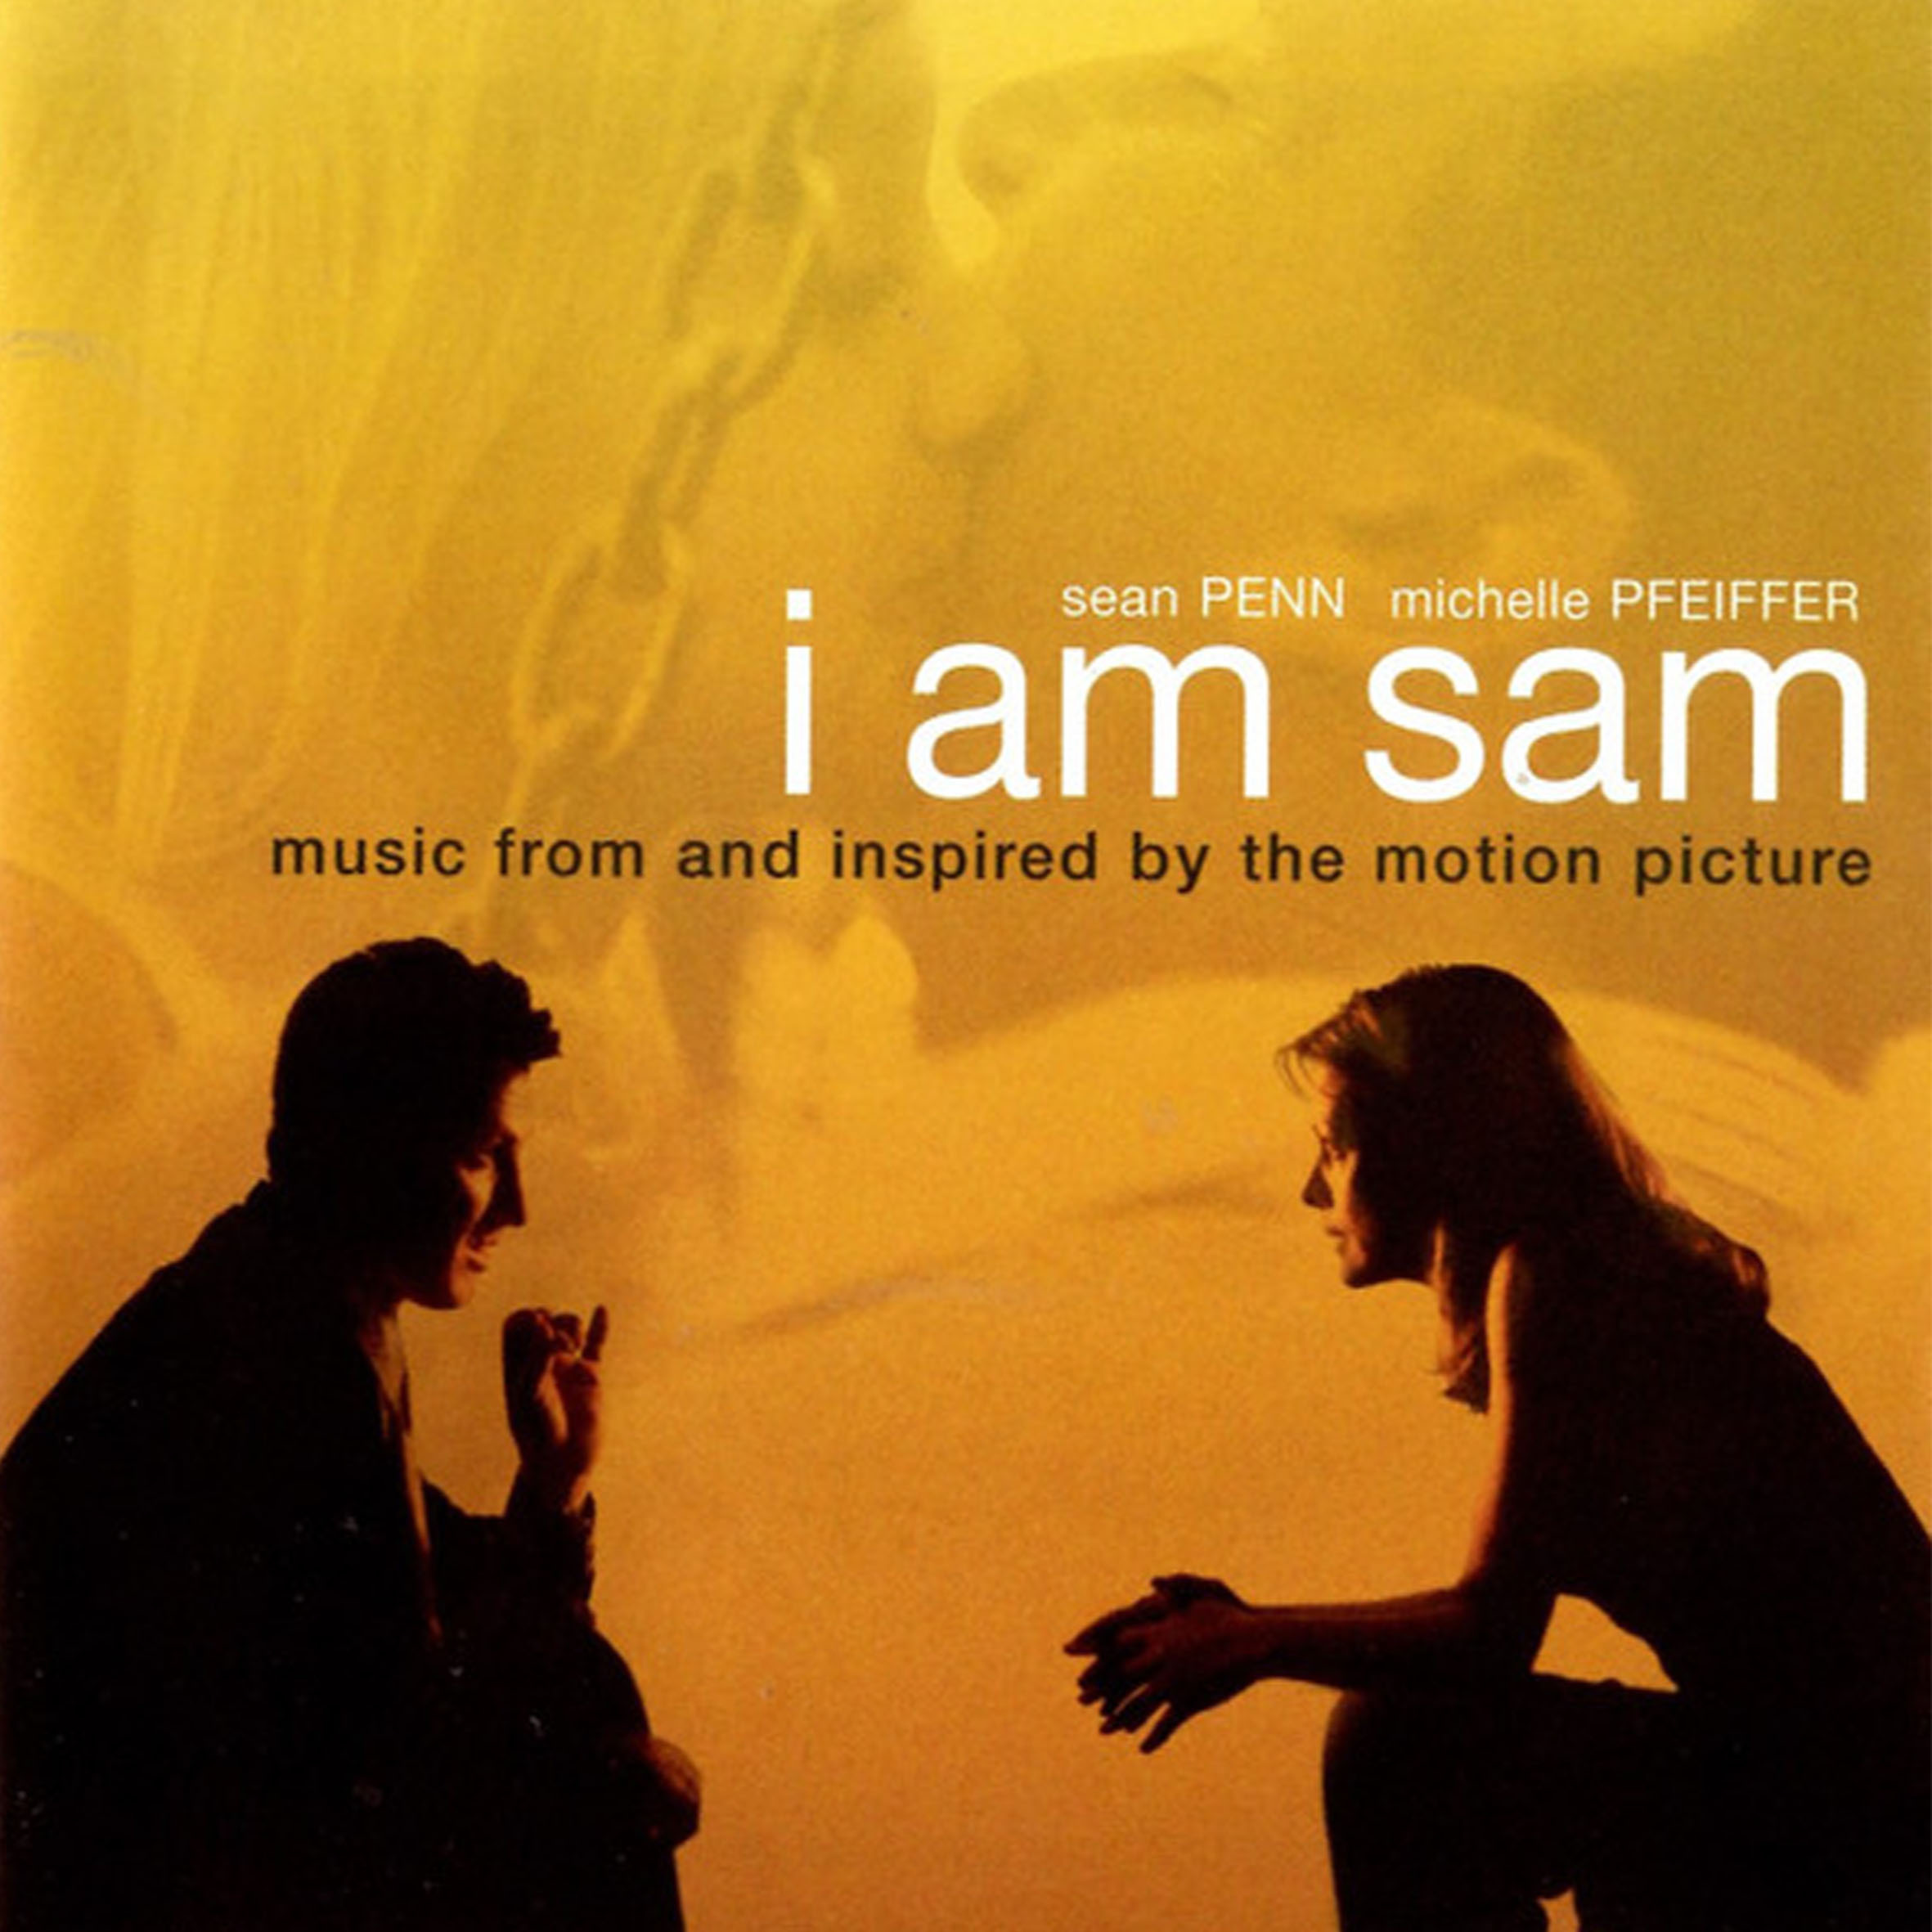 CD - I Am Sam - Music From The Motion Picture Soundtrack